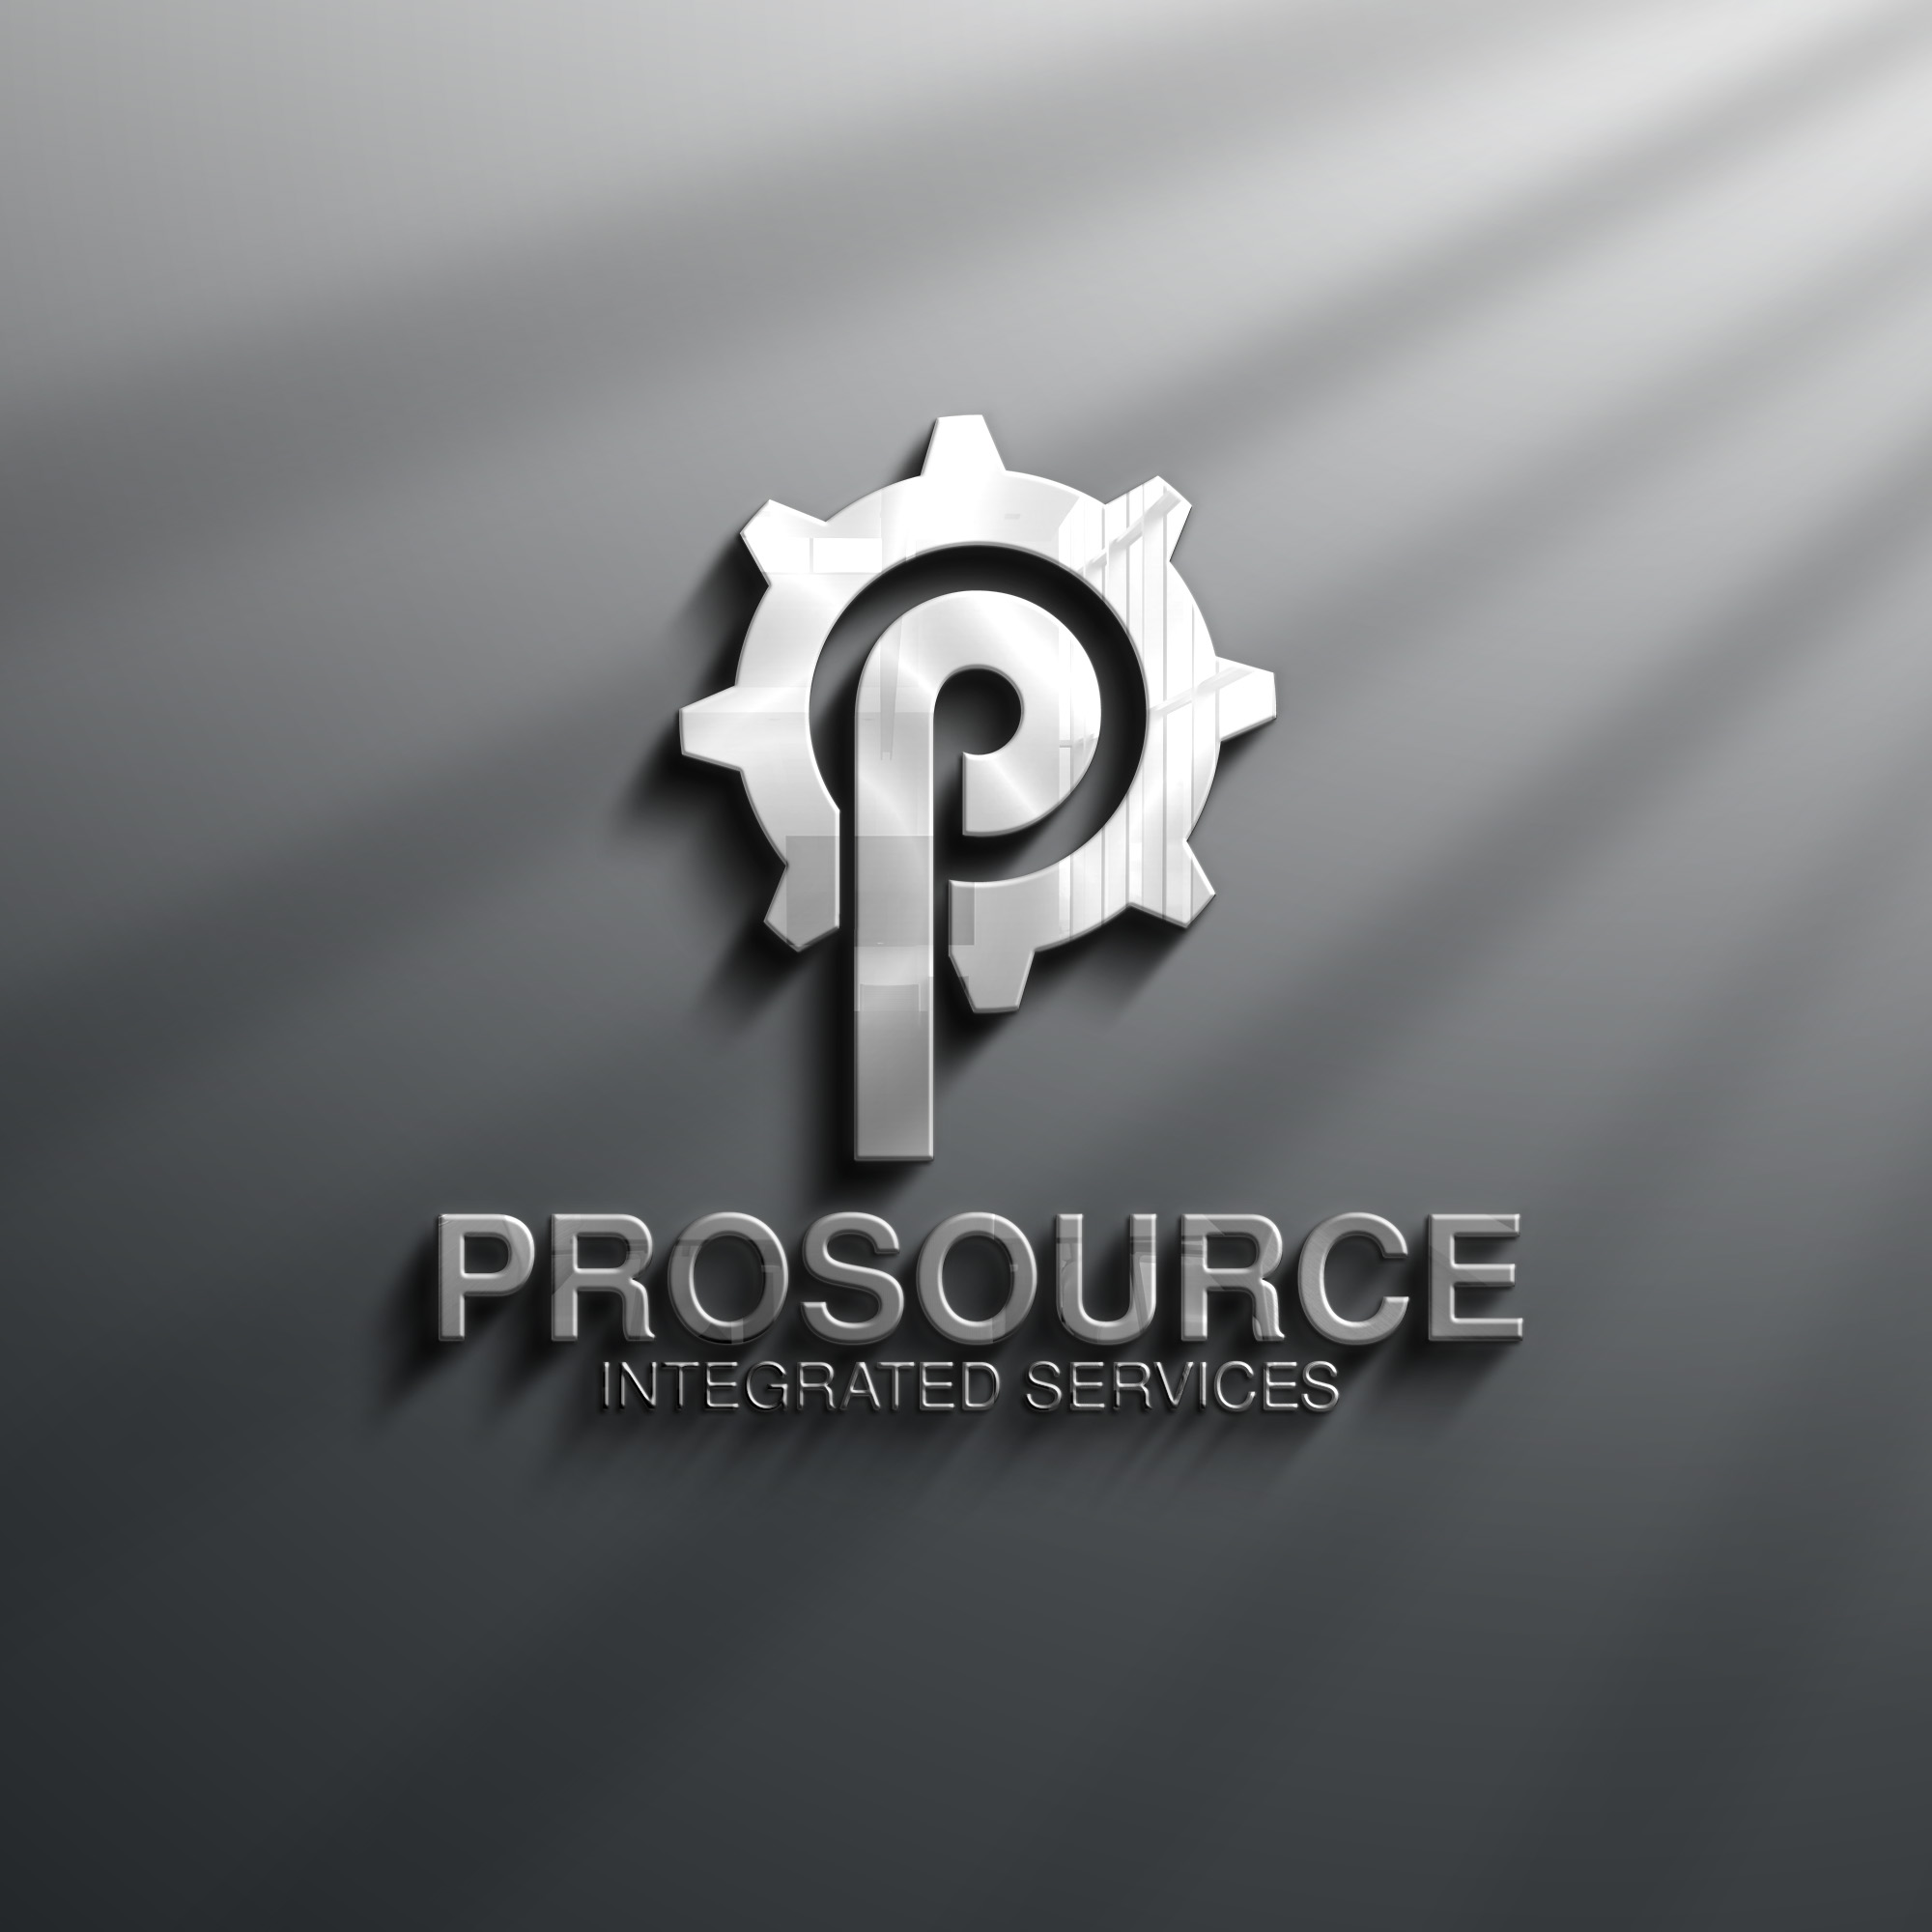 Prosource Integrated Services Logo Designed by Constance AI